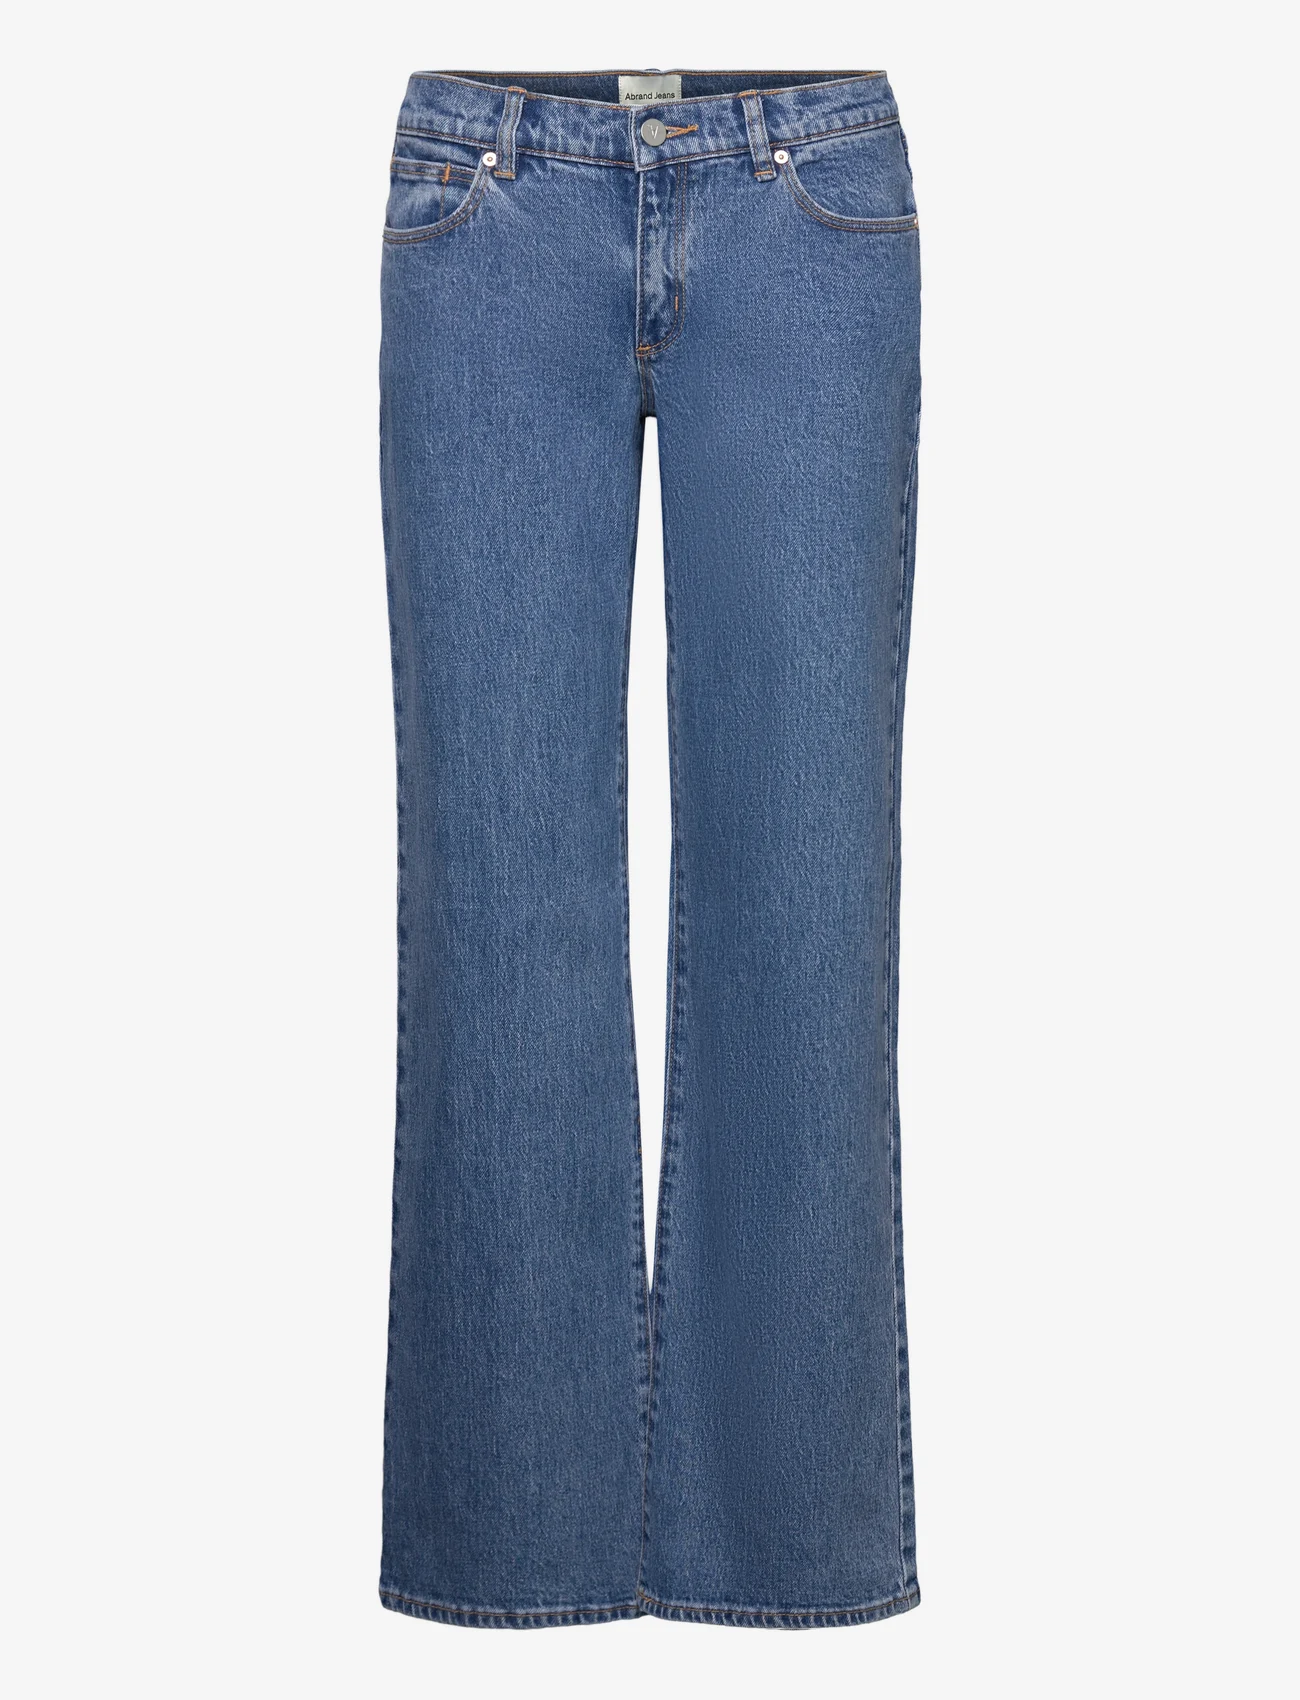 ABRAND - A 99 LOW & WIDE DENISE - brede jeans - blue - 0